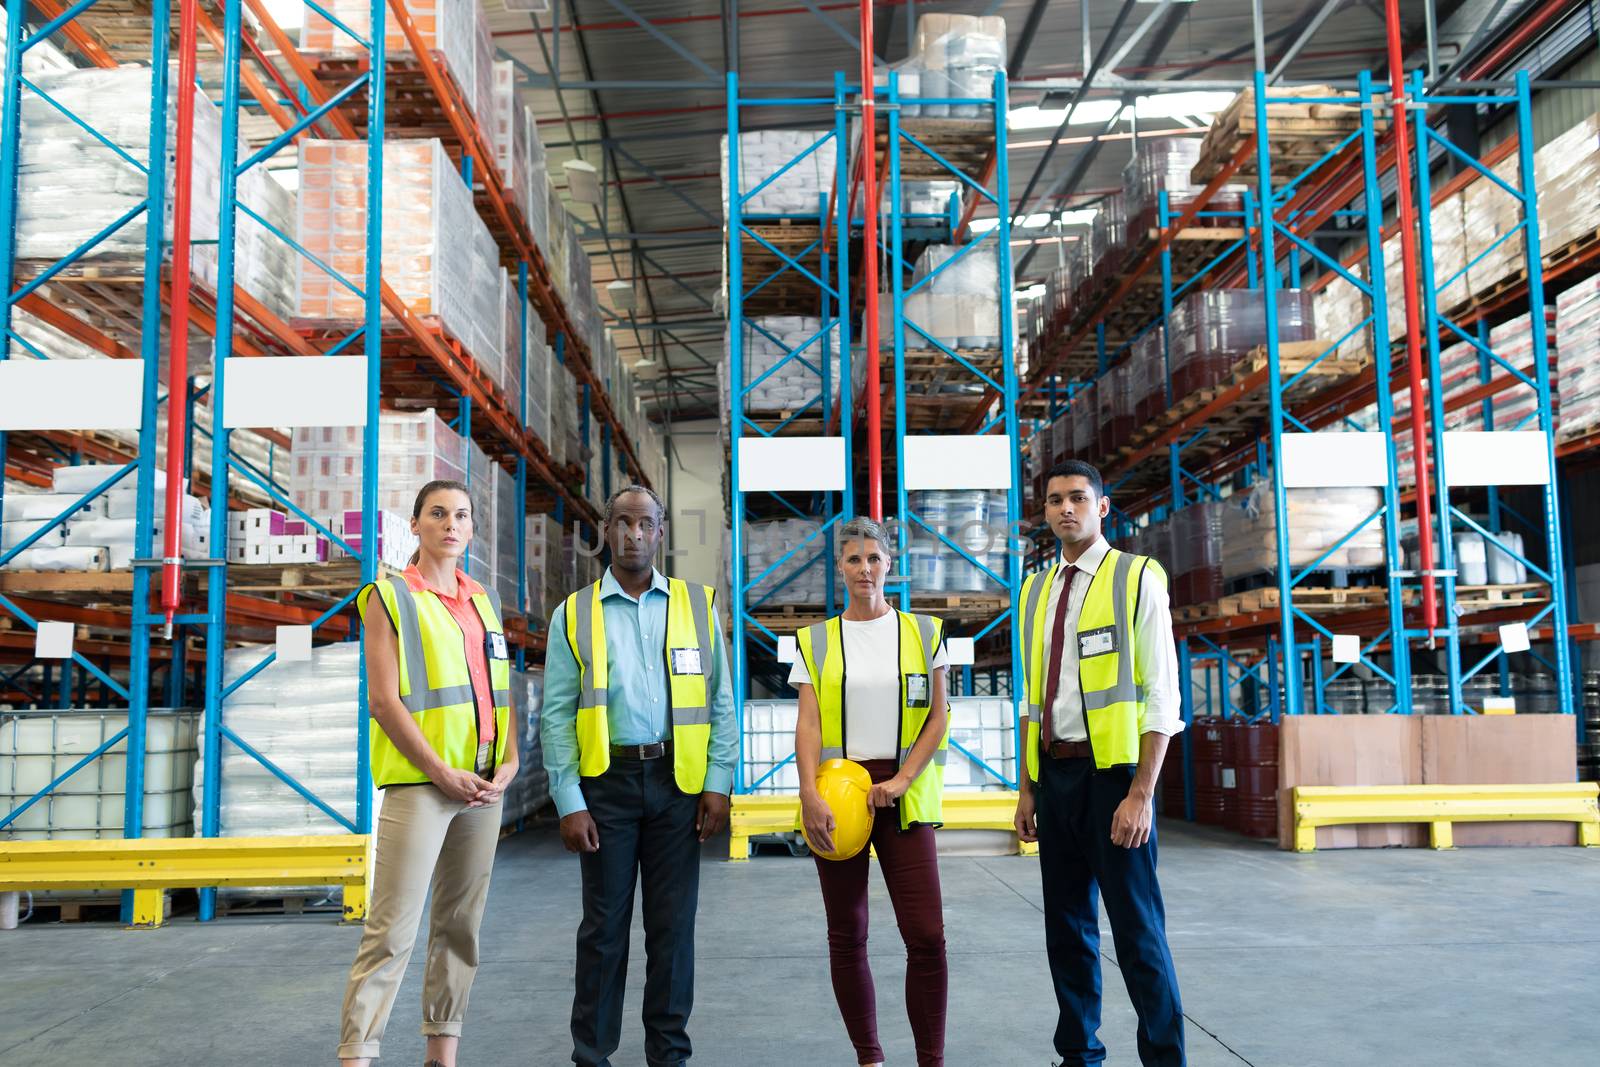 Front view of diverse warehouse staffs standing together in warehouse. This is a freight transportation and distribution warehouse. Industrial and industrial workers concept